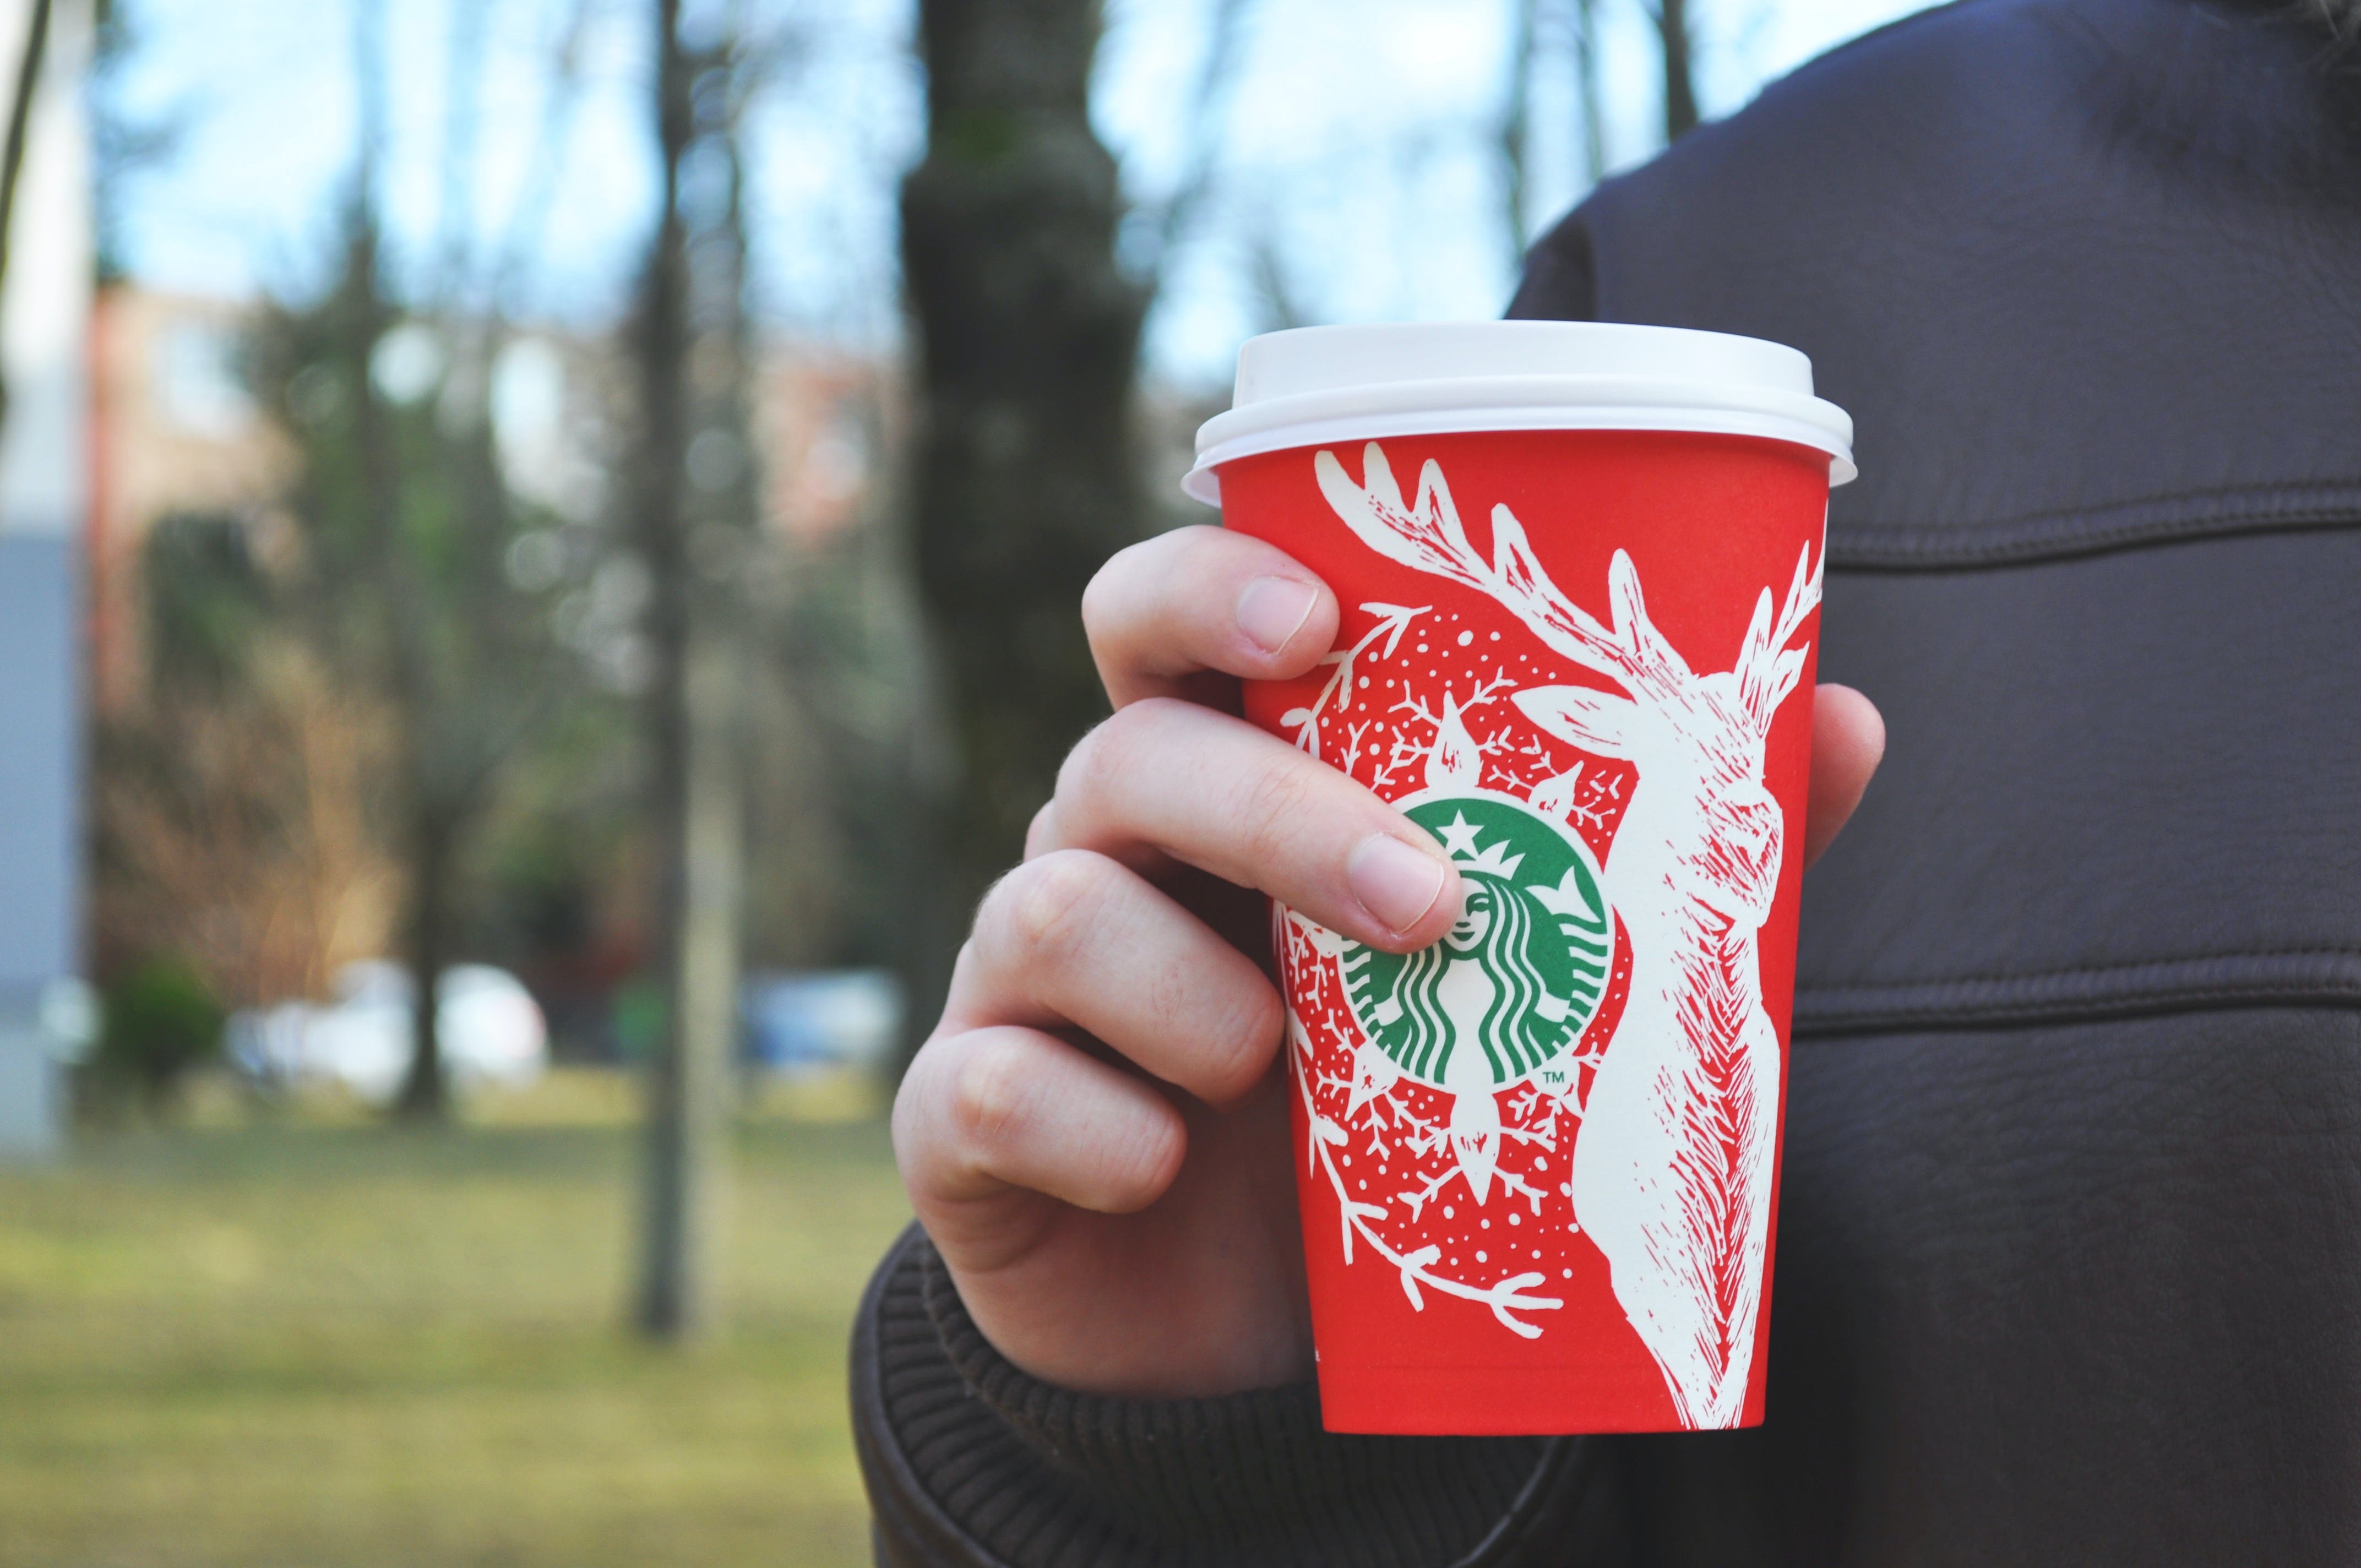 Starbucks Introduces the Holiday Limited Time Merry Mint White Mocha to Its Menu.